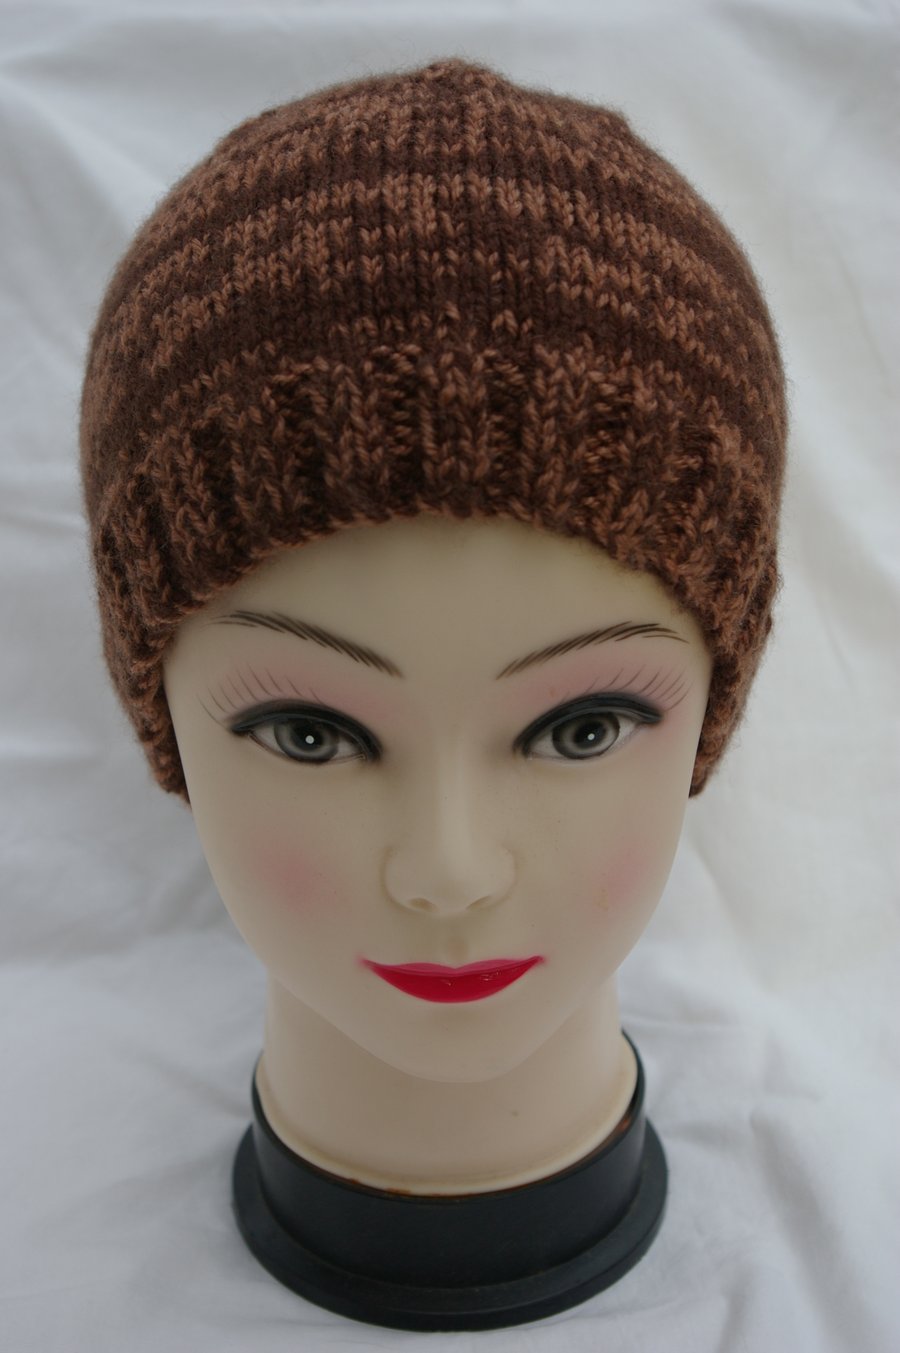 Hand knitted Beanie Hat in Browns